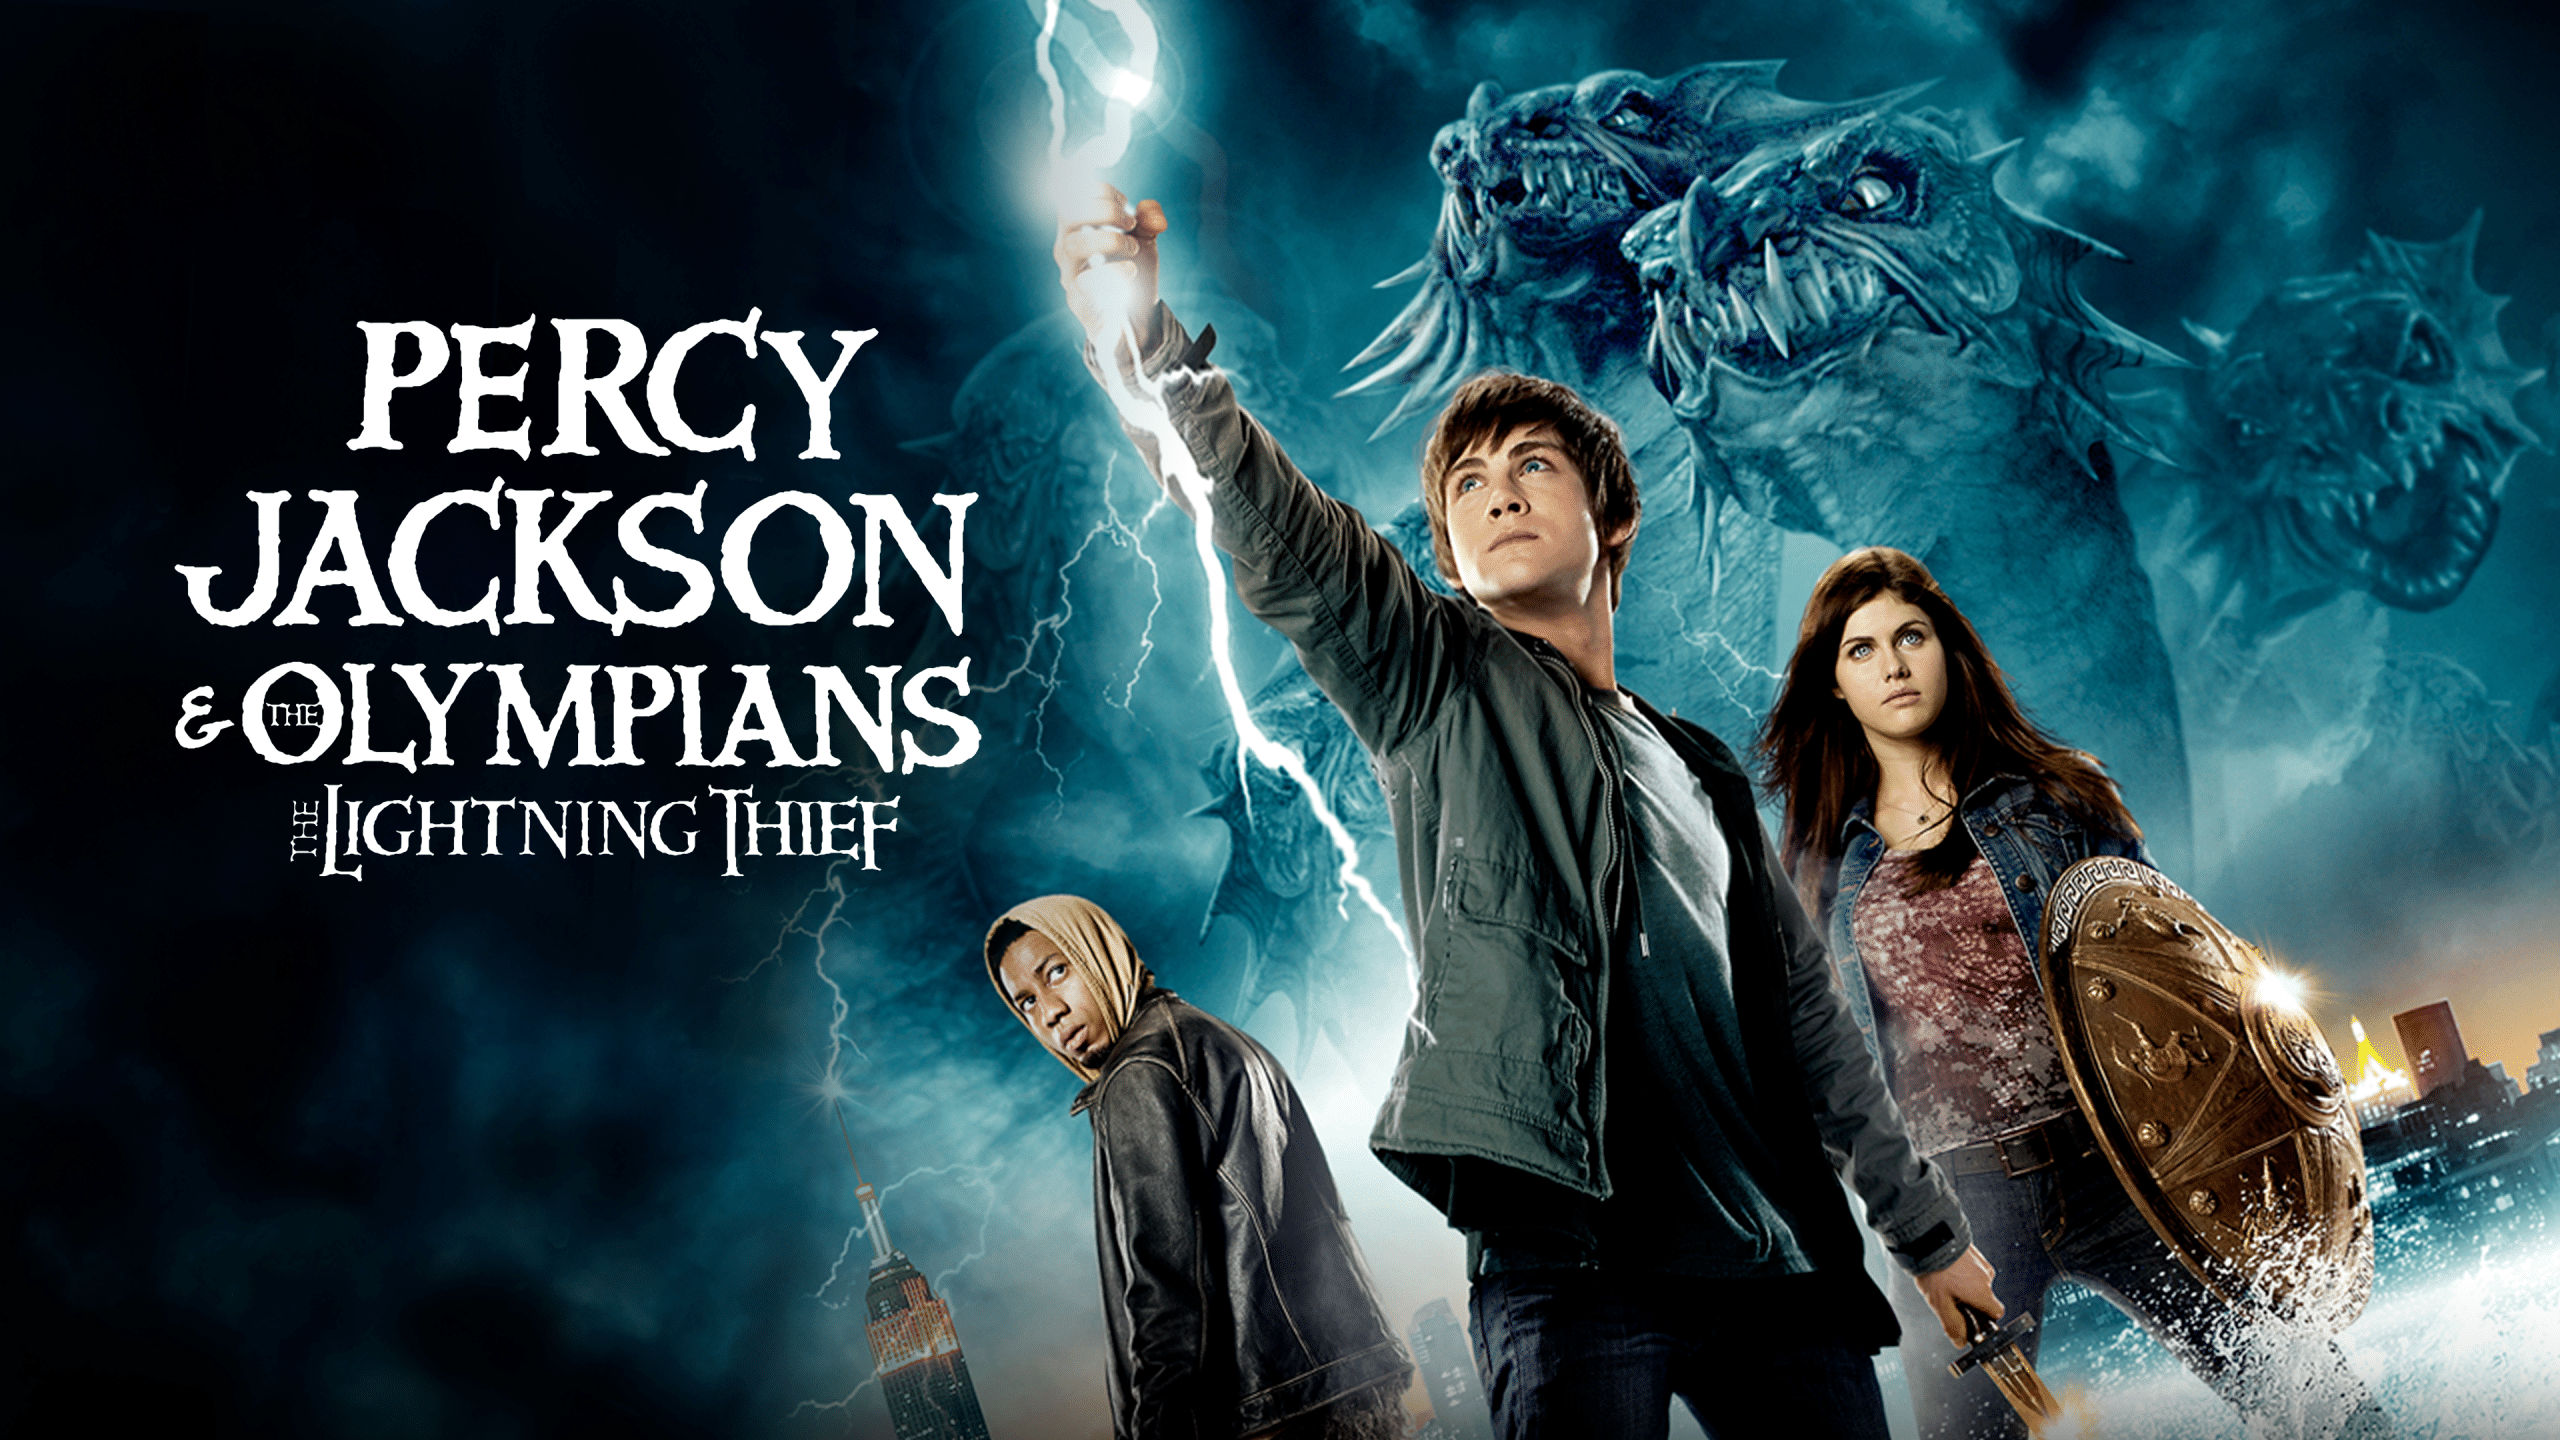 Percy Jackson And The Olympians The Lightning Thief Review What's On